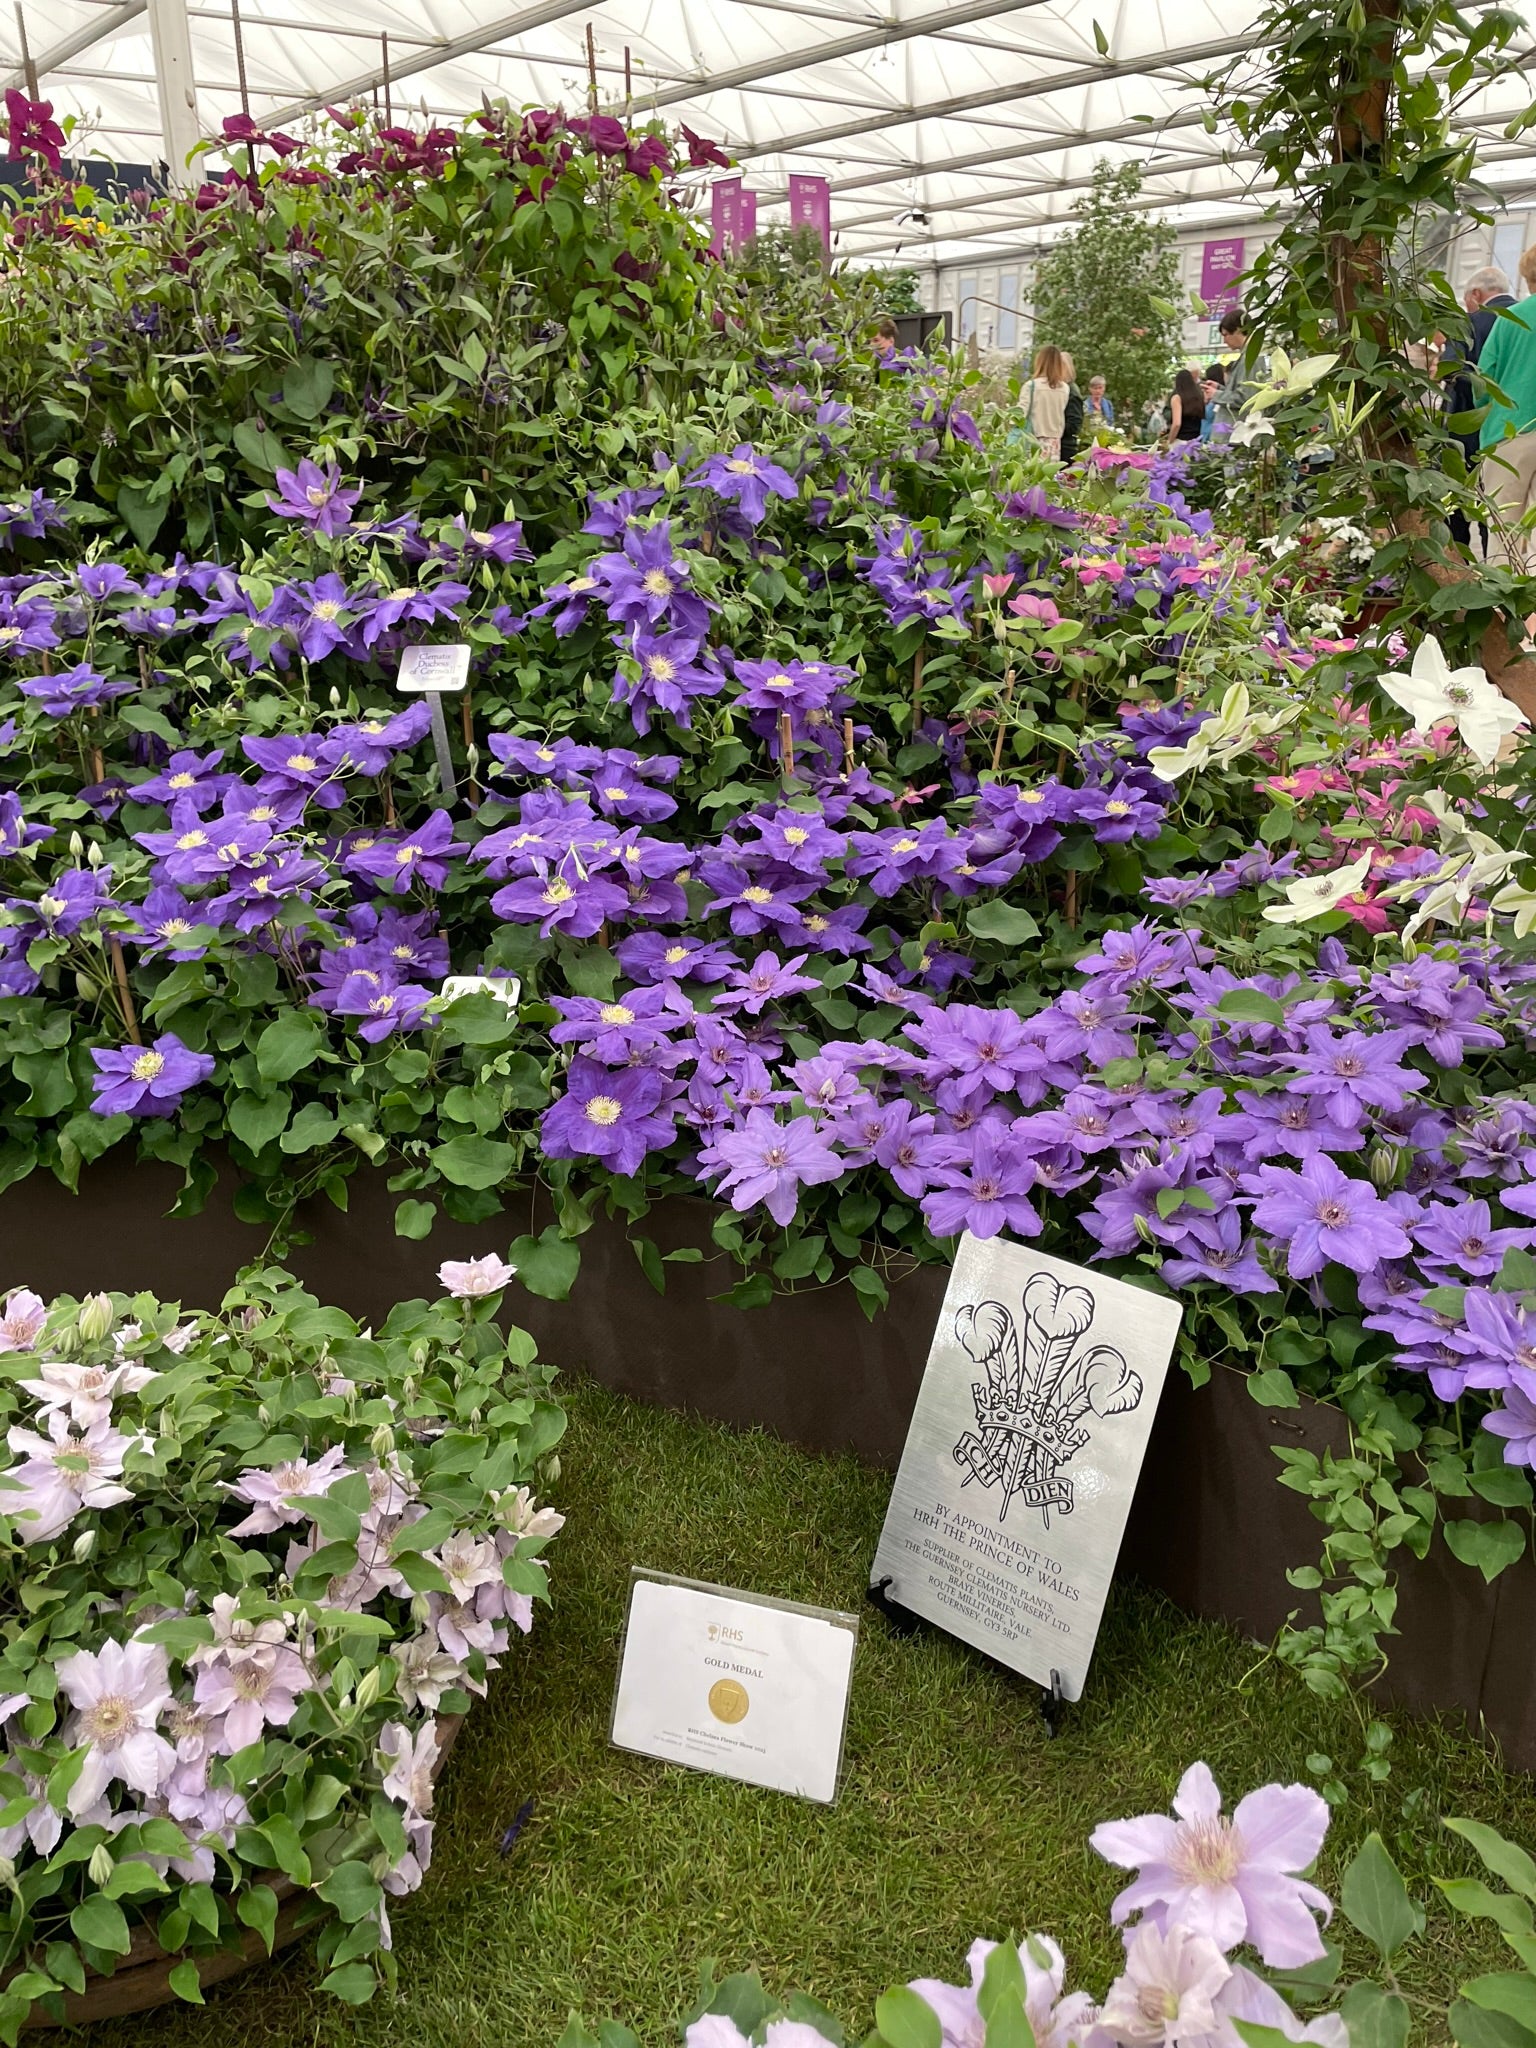 Raymond J Evison Clematis, Gold at Chelsea for the 33rd time.